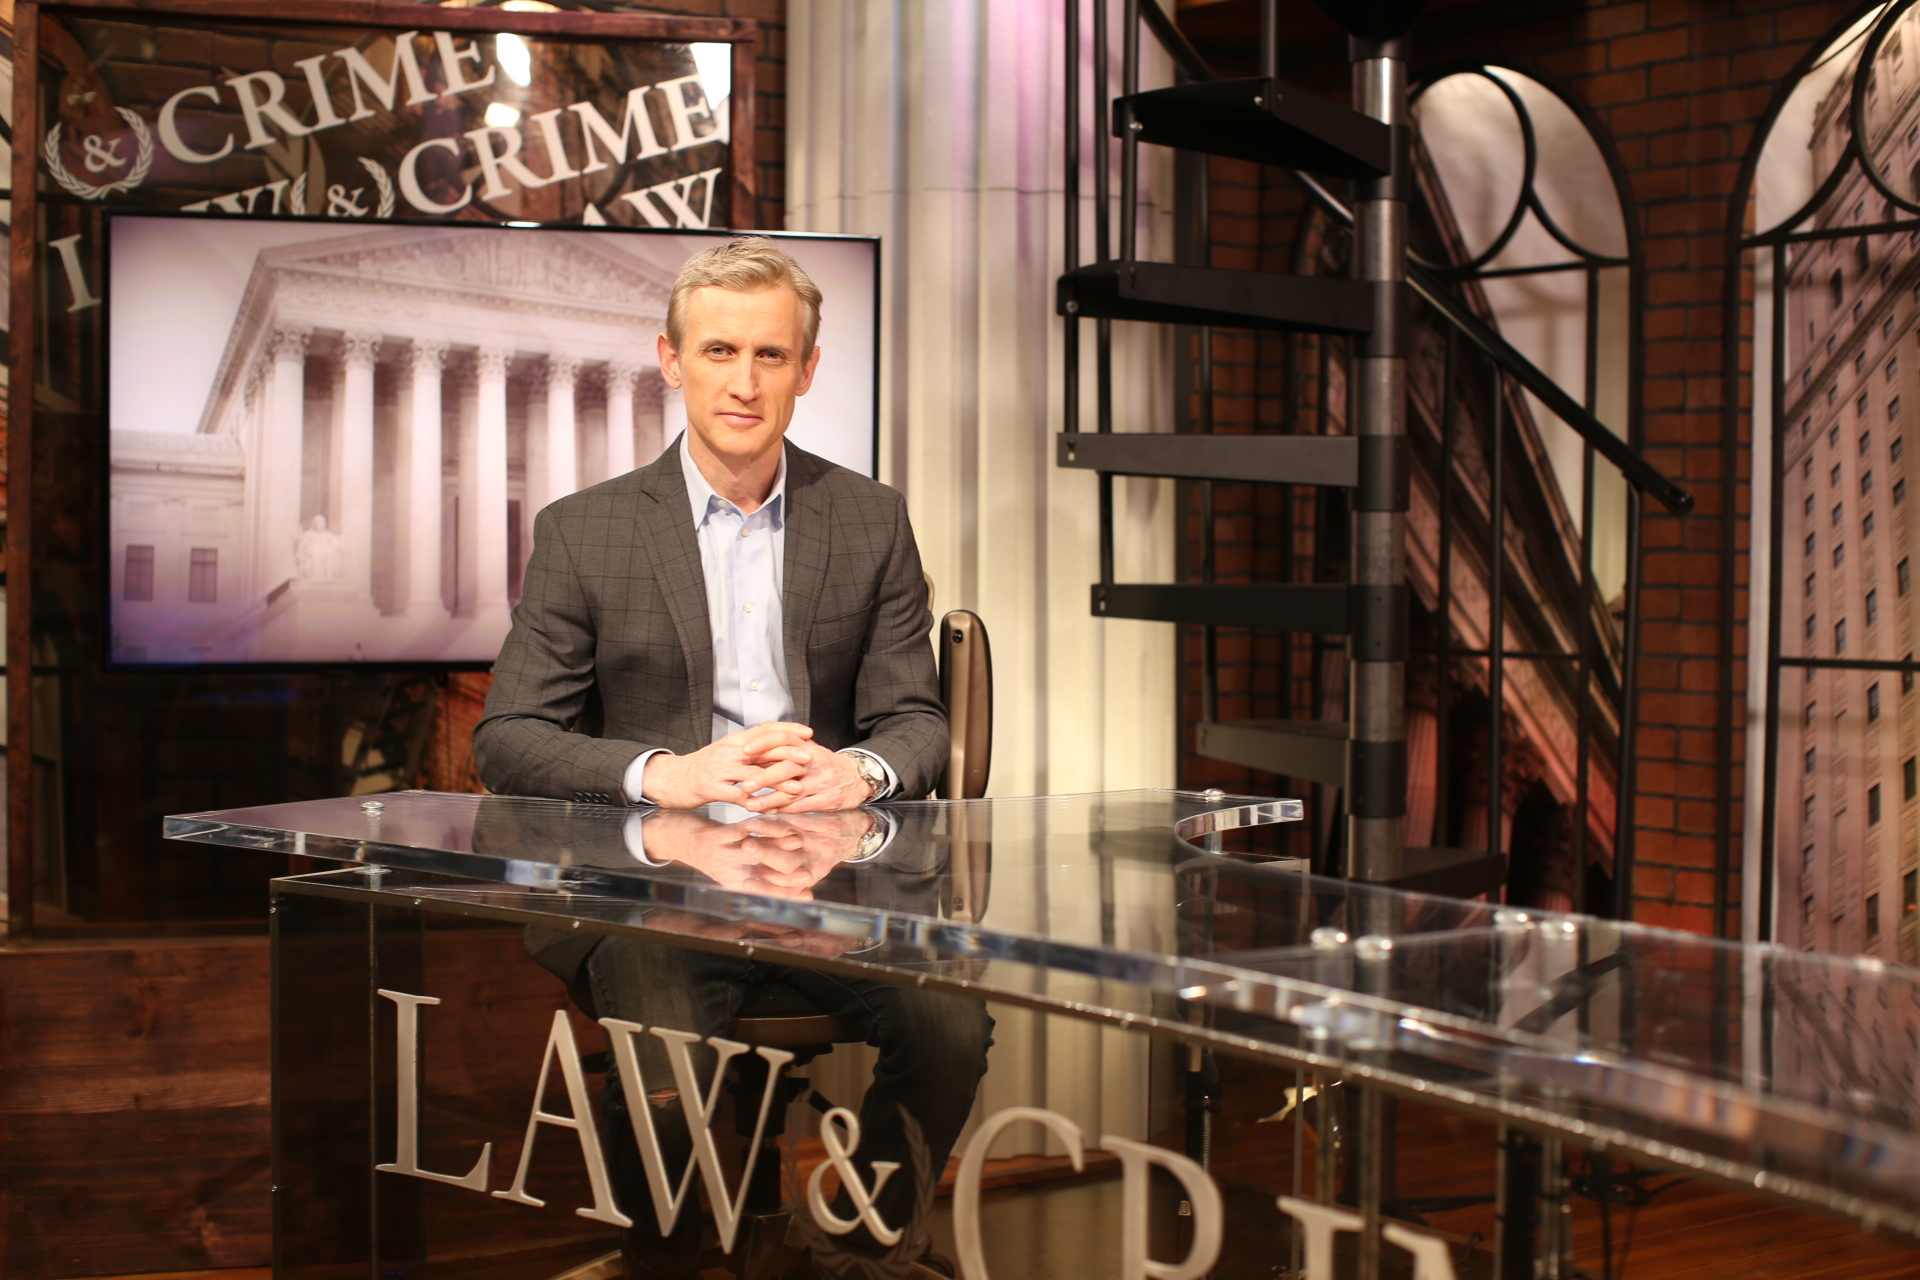 Law&Crime Network Acquired by Media Startup Jellysmack